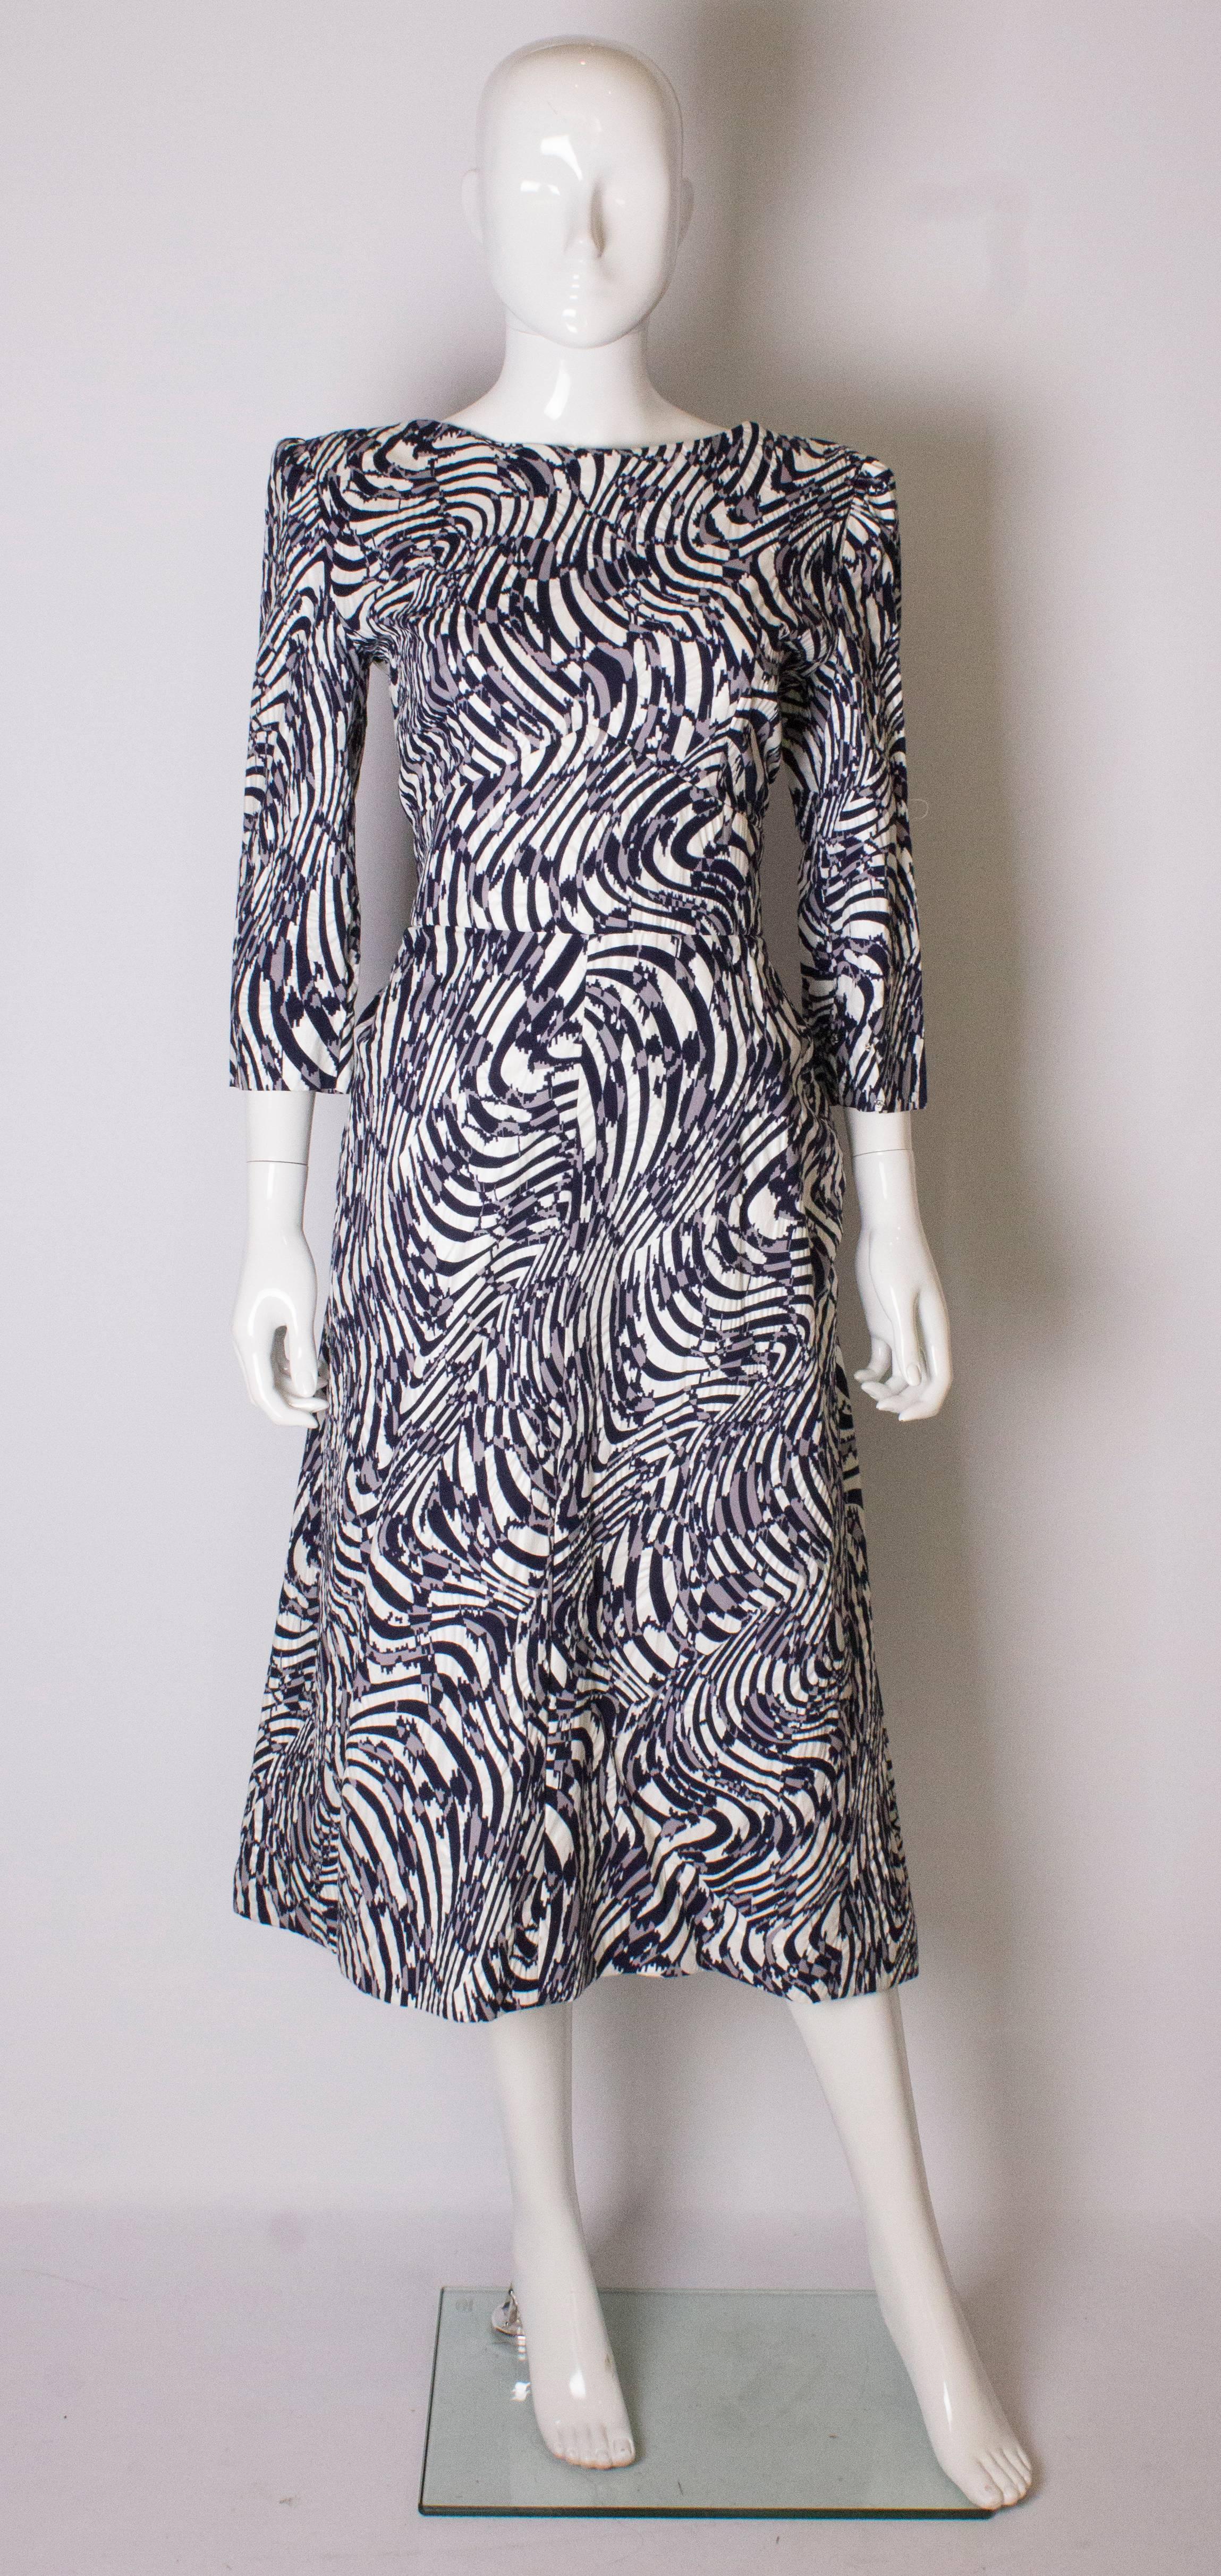 A great dress by Donald Campbell. The dress has a white background with a grey and blue print. It has a round neckline, elbow length sleeves, and a scoop neckline at the back. There is a  central back zip, a back bow and peplum. The sleeves narrow